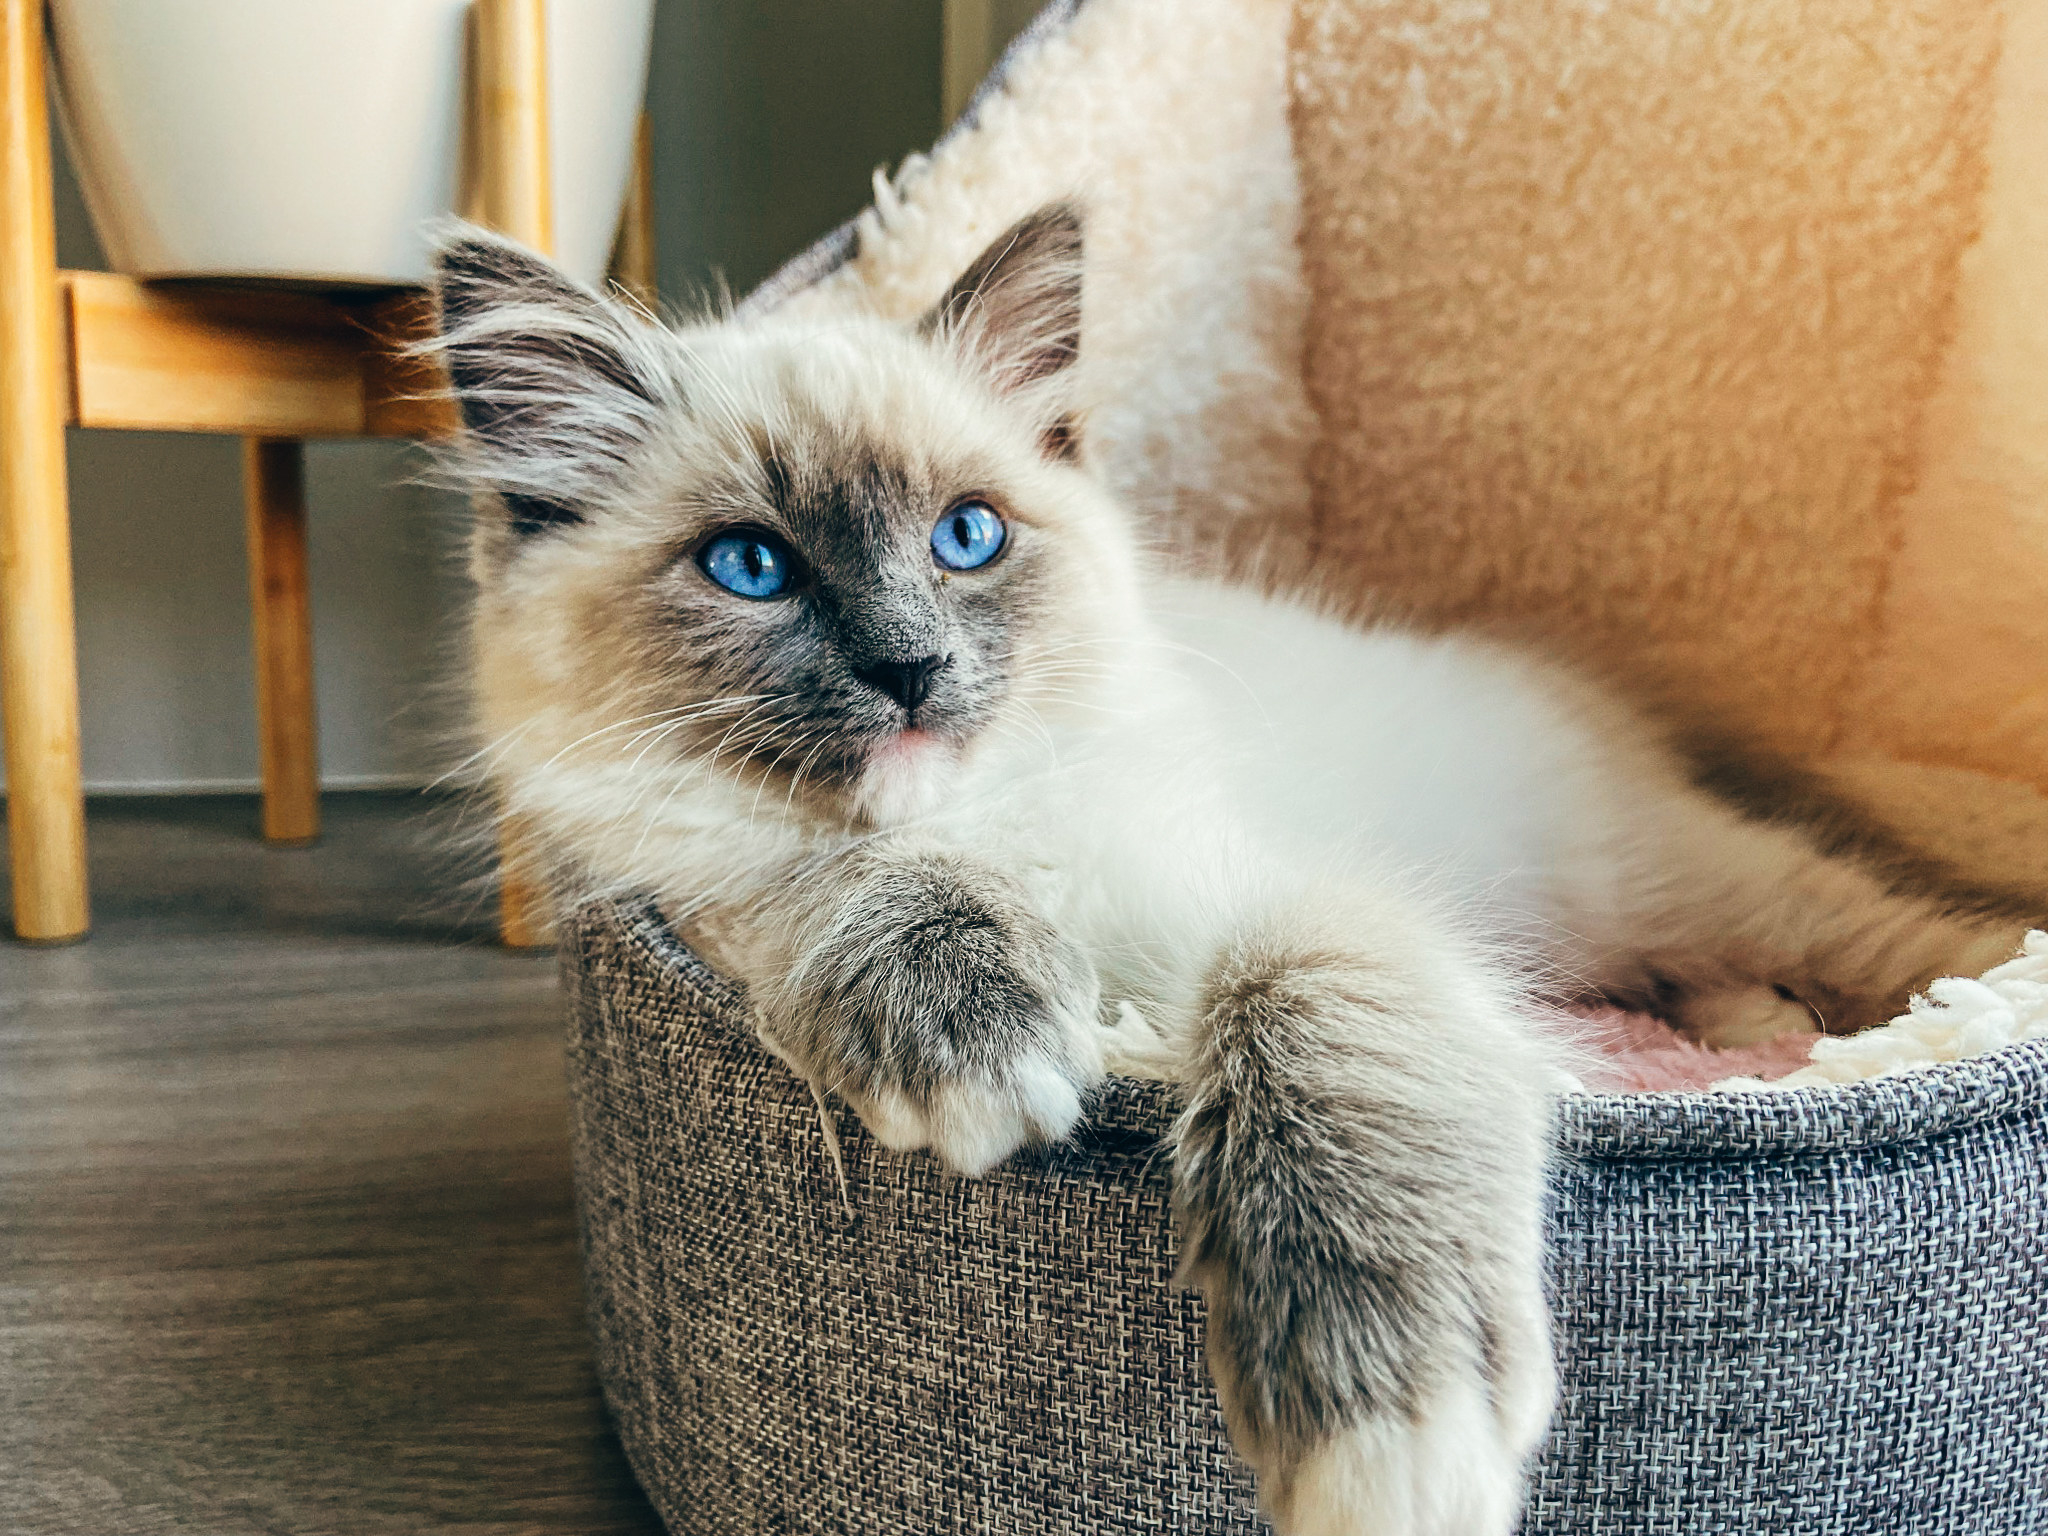 A ragdoll chilling on the couch